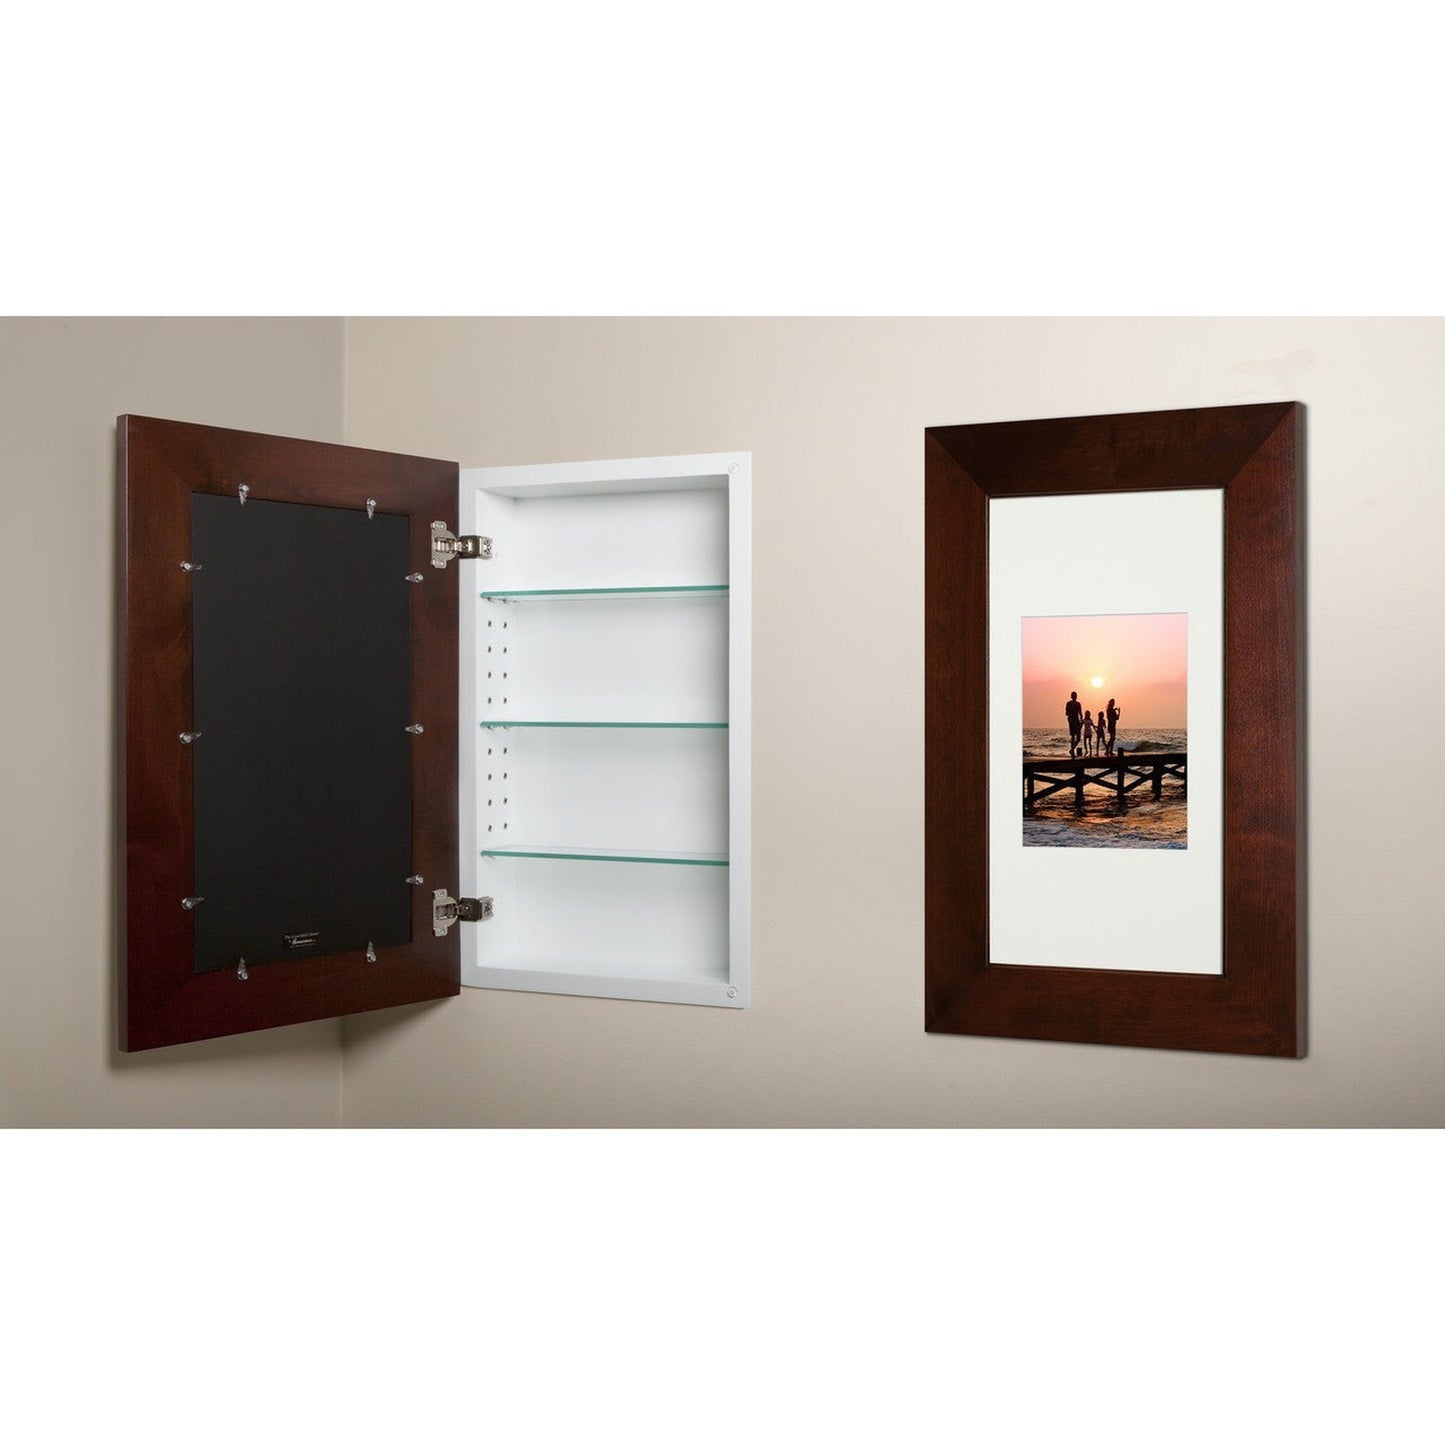 Fox Hollow Furnishings 14" x 24" Espresso Extra Large Special 3" Depth White Interior Recessed Picture Frame Medicine Cabinet With Mirror and Black Matting